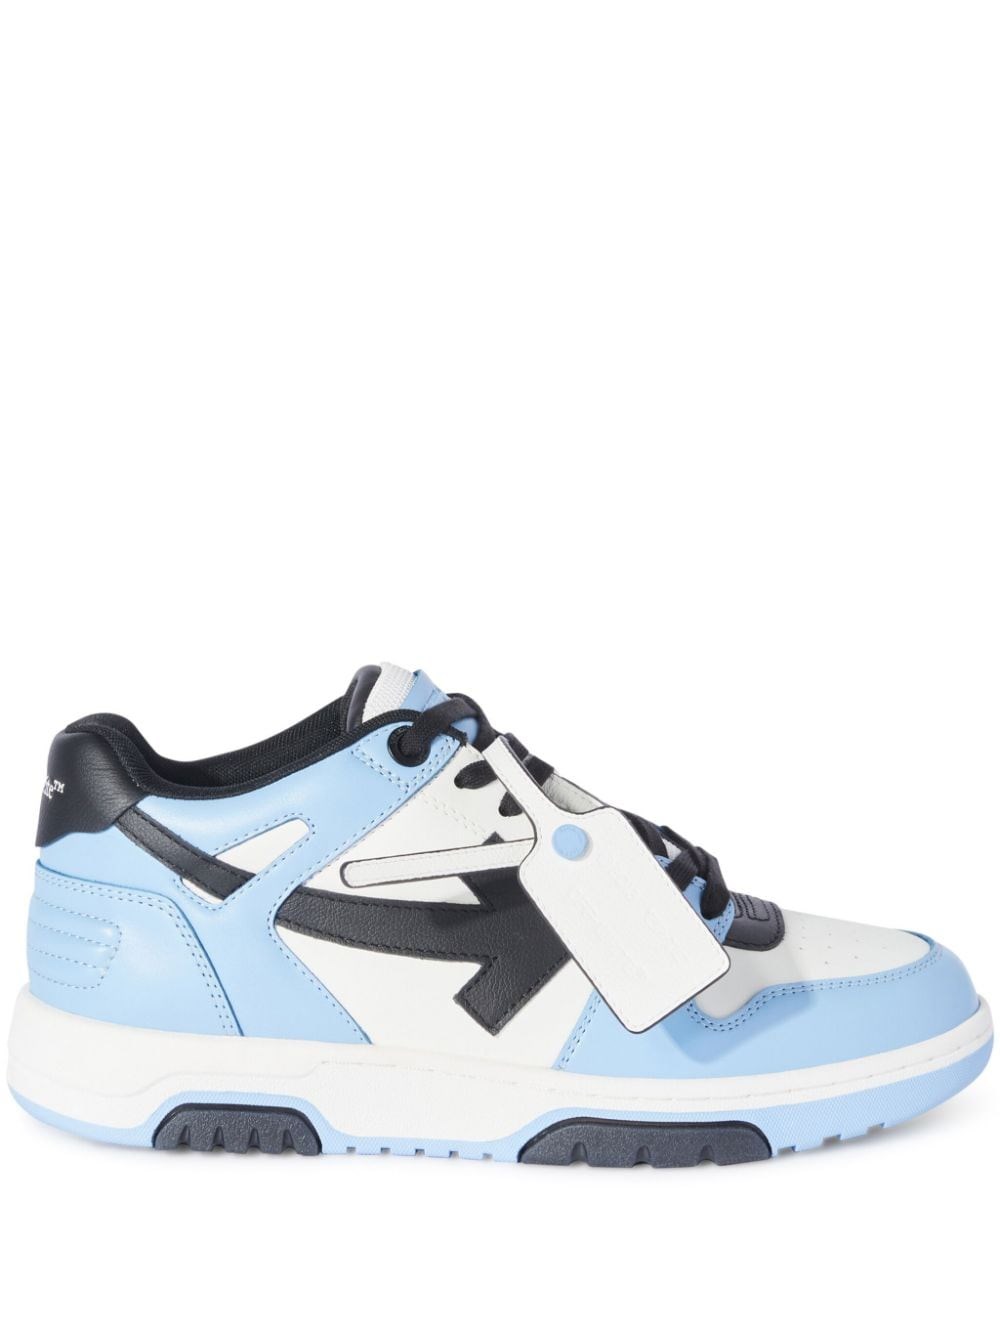 OFF-WHITE 'OUT OF OFFICE' SNEAKERS